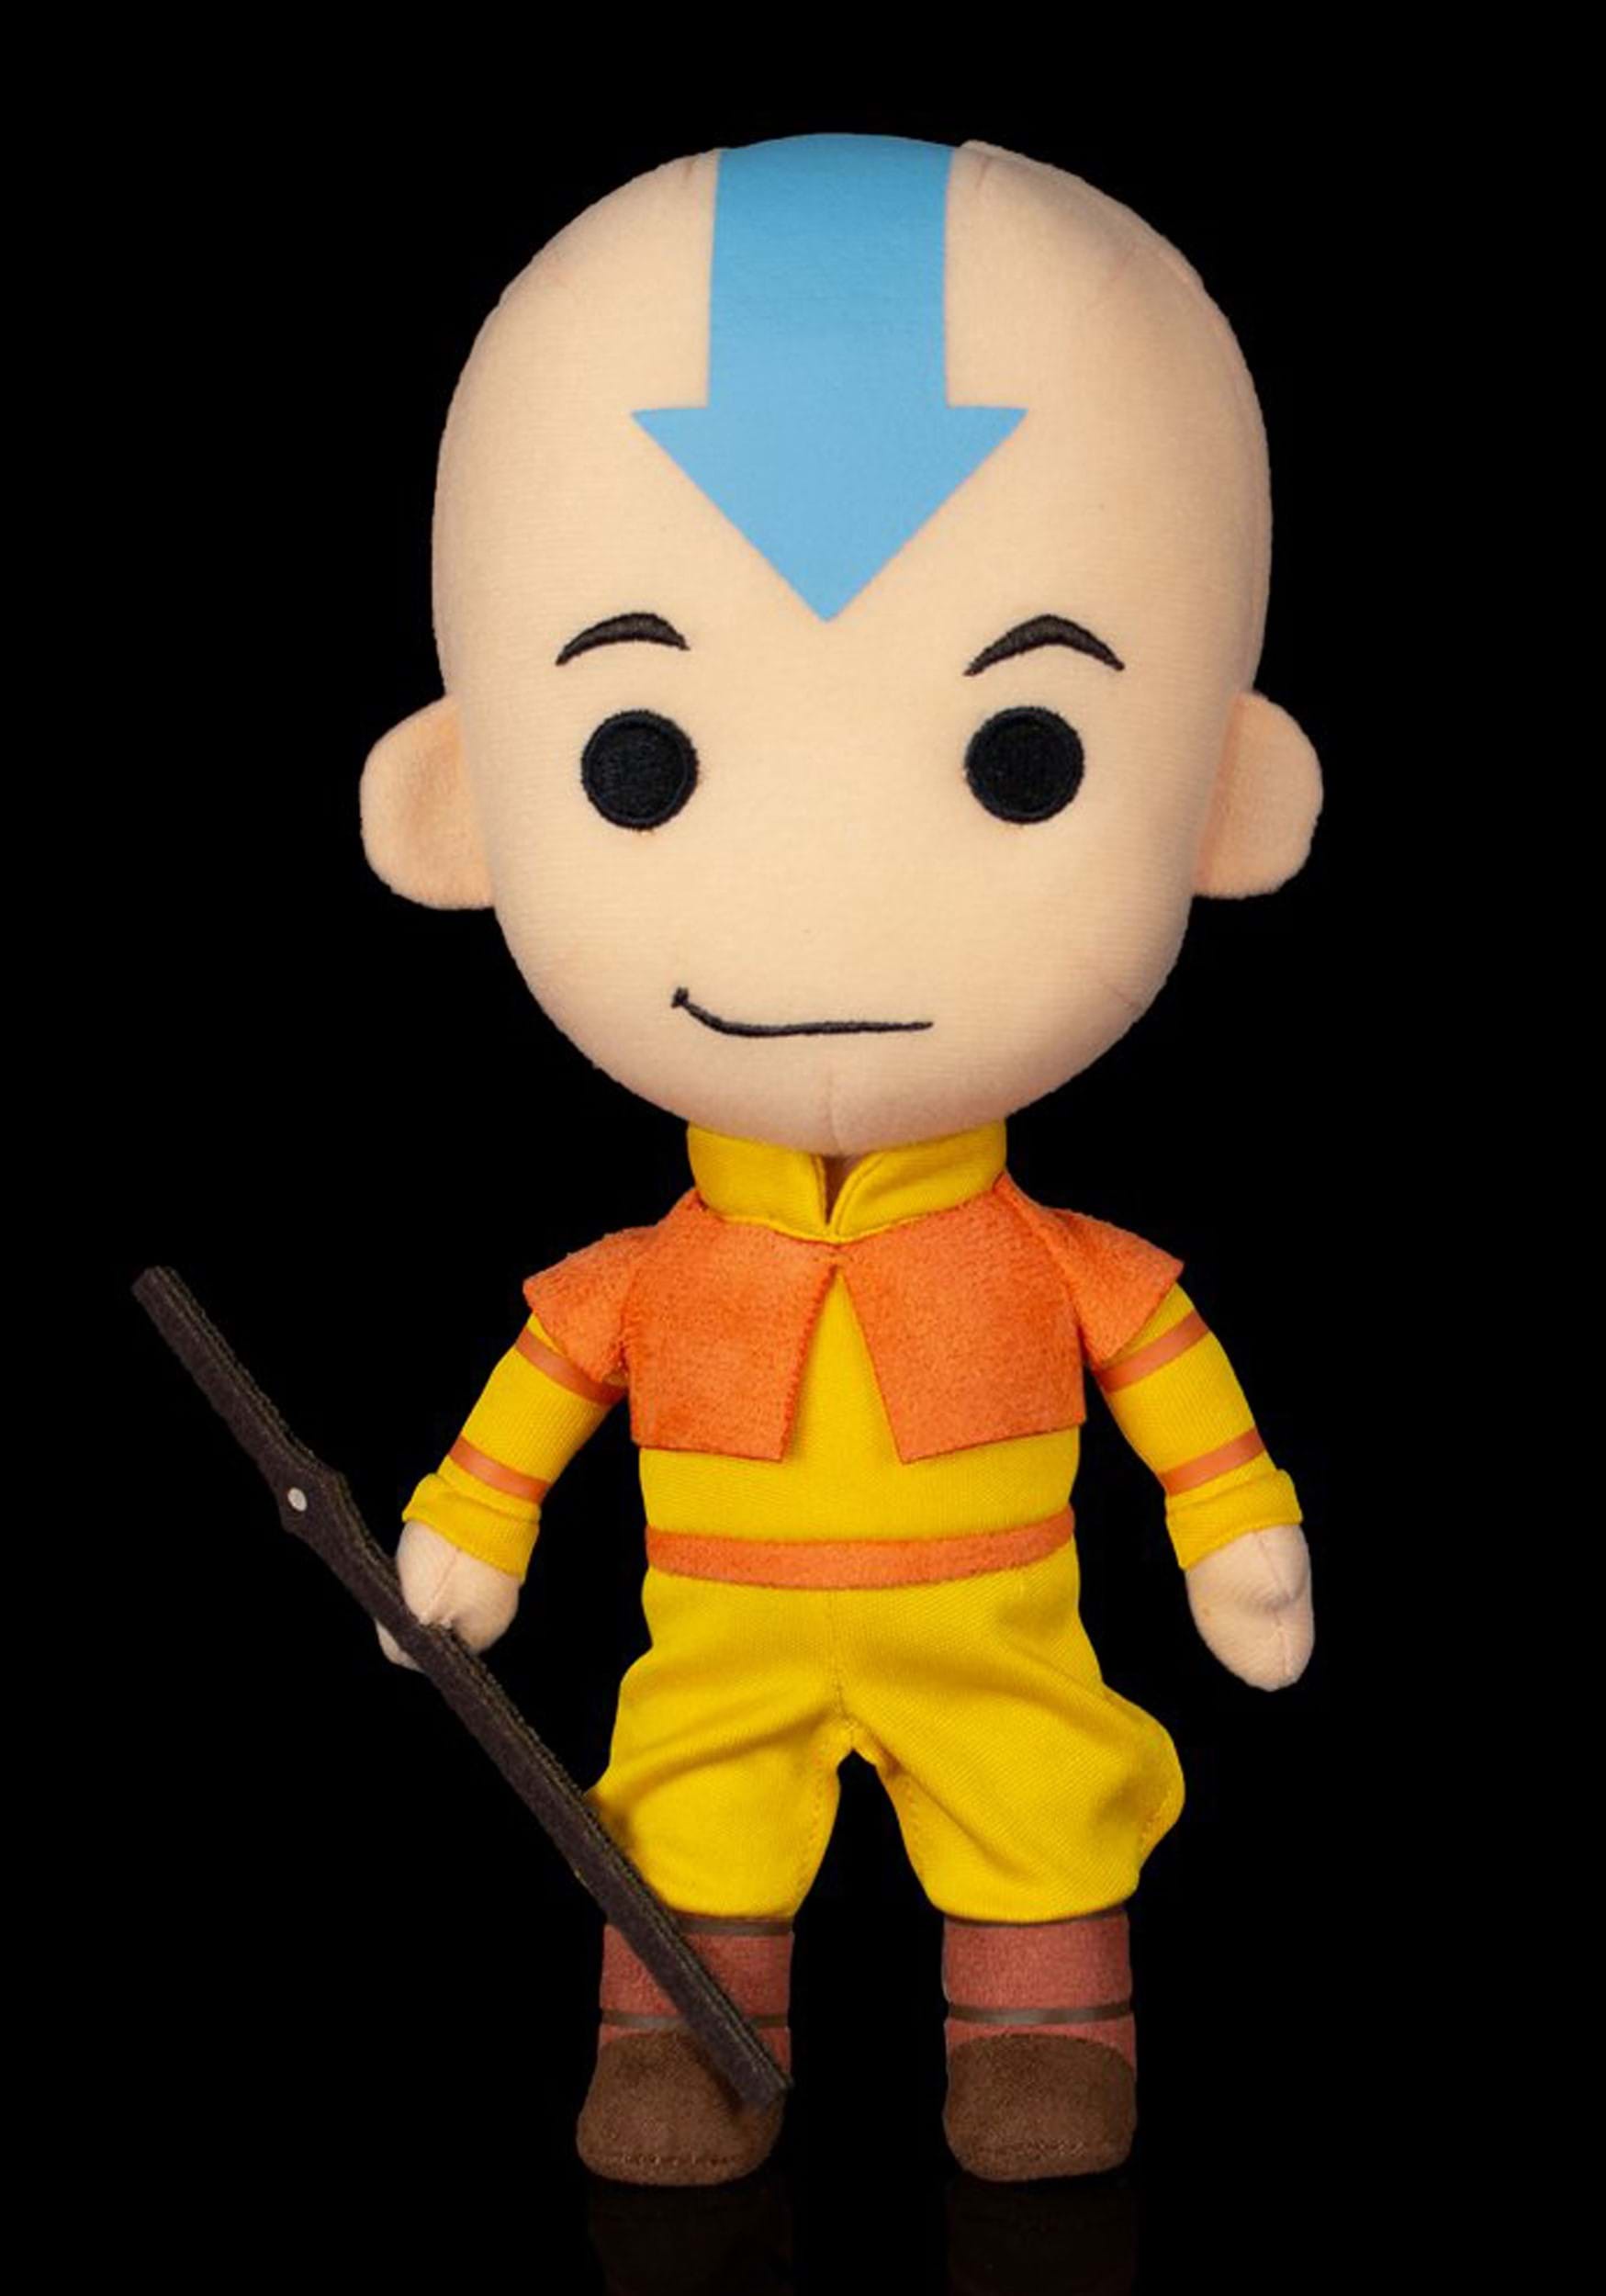 Avatar the Last Airbender Q-Pal Aang Soft-Sculpted Figure